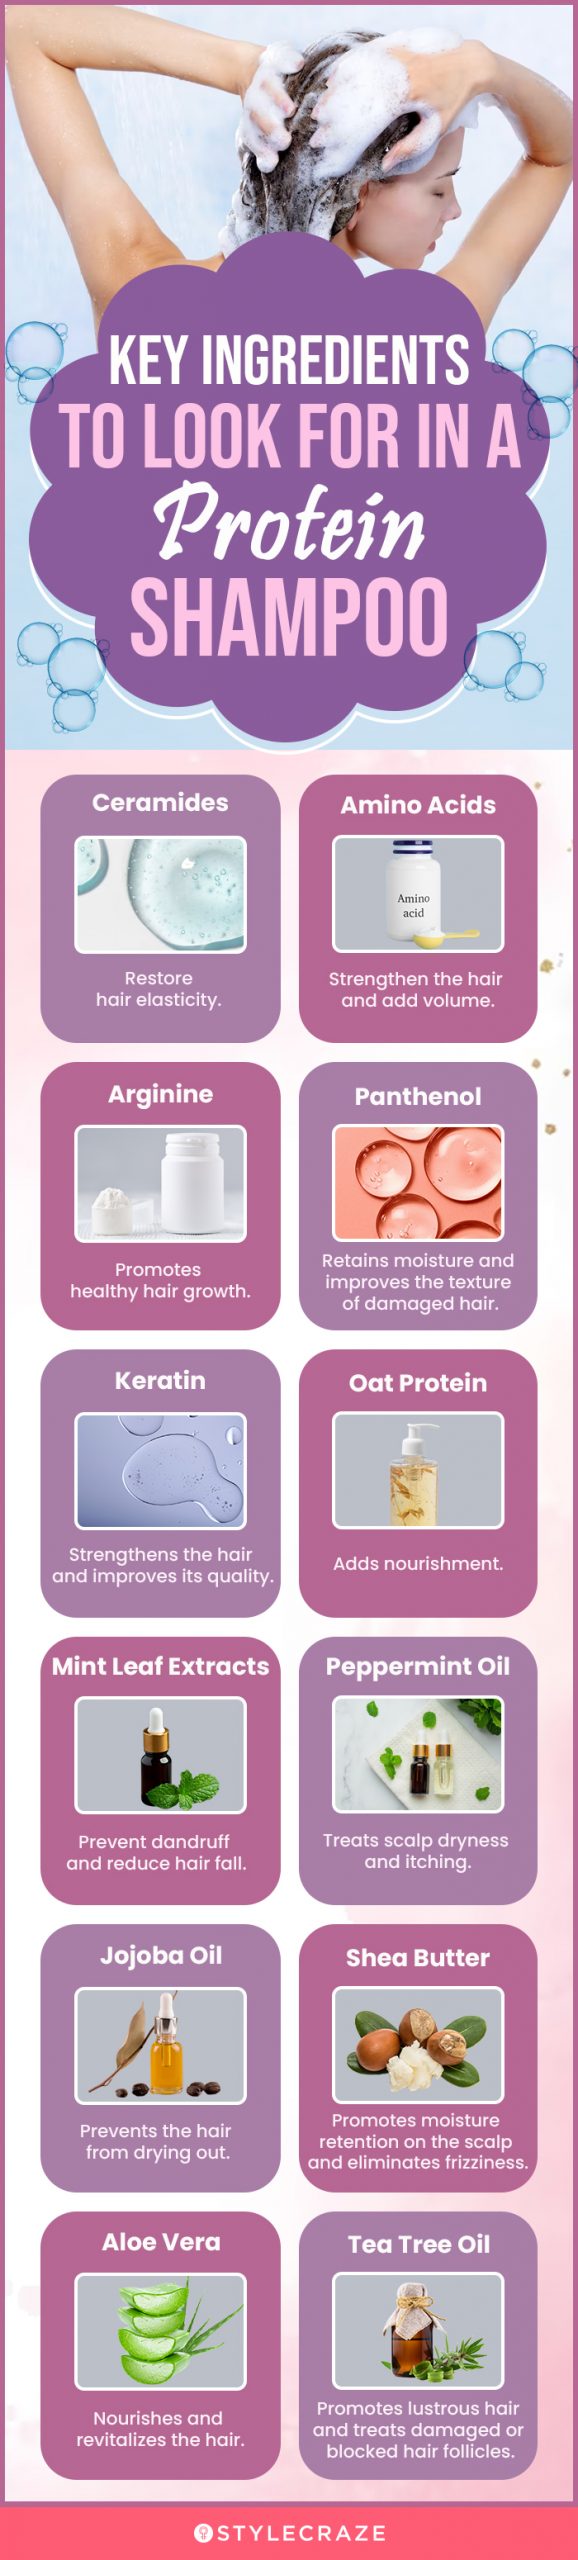 Key Ingredients To Look For In A Protein Shampoo (infographic)